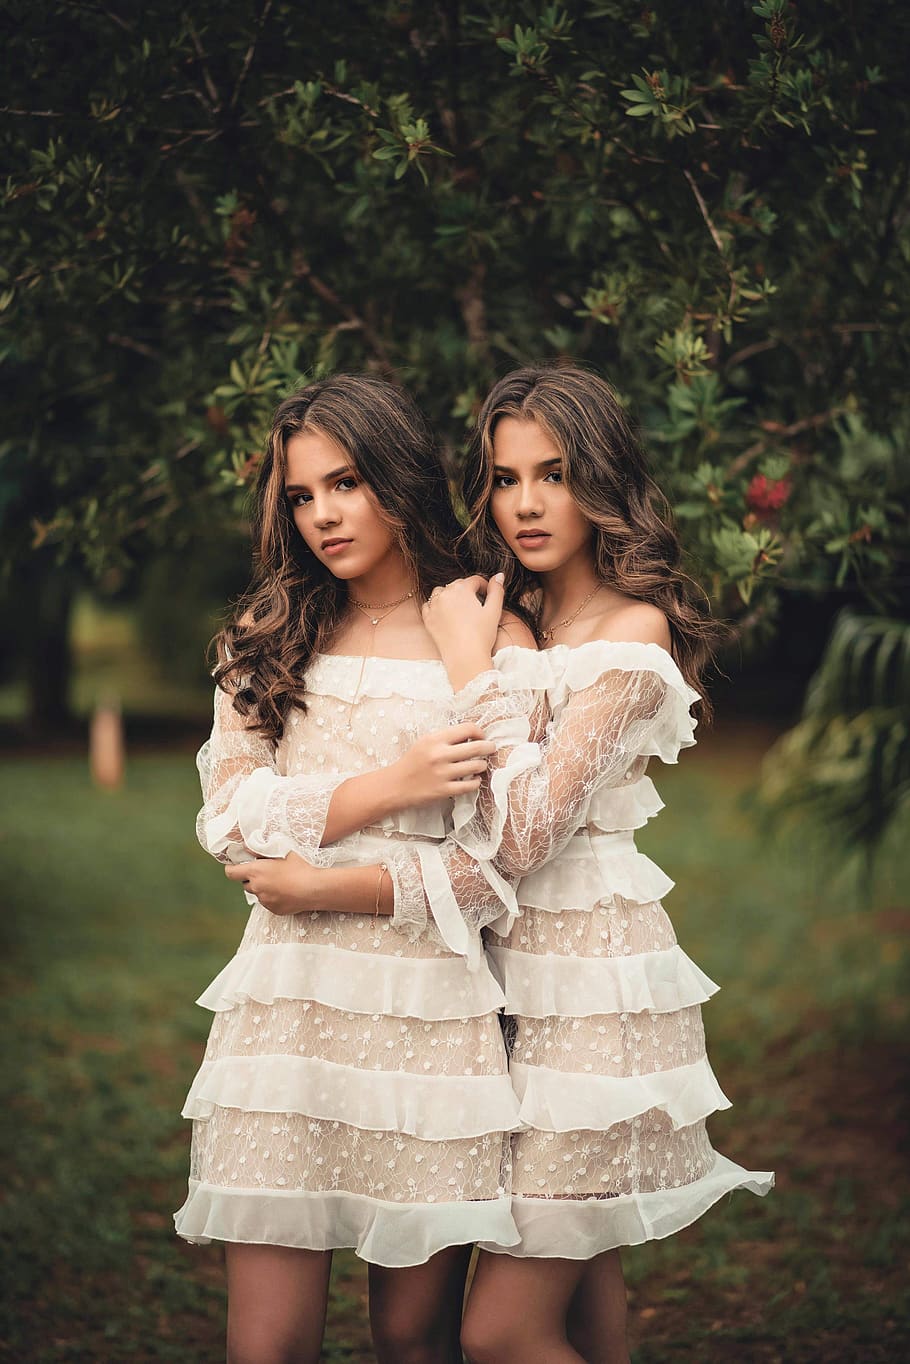 Two Standing Women Wearing White Off-shoulder Dresses Near Green Trees